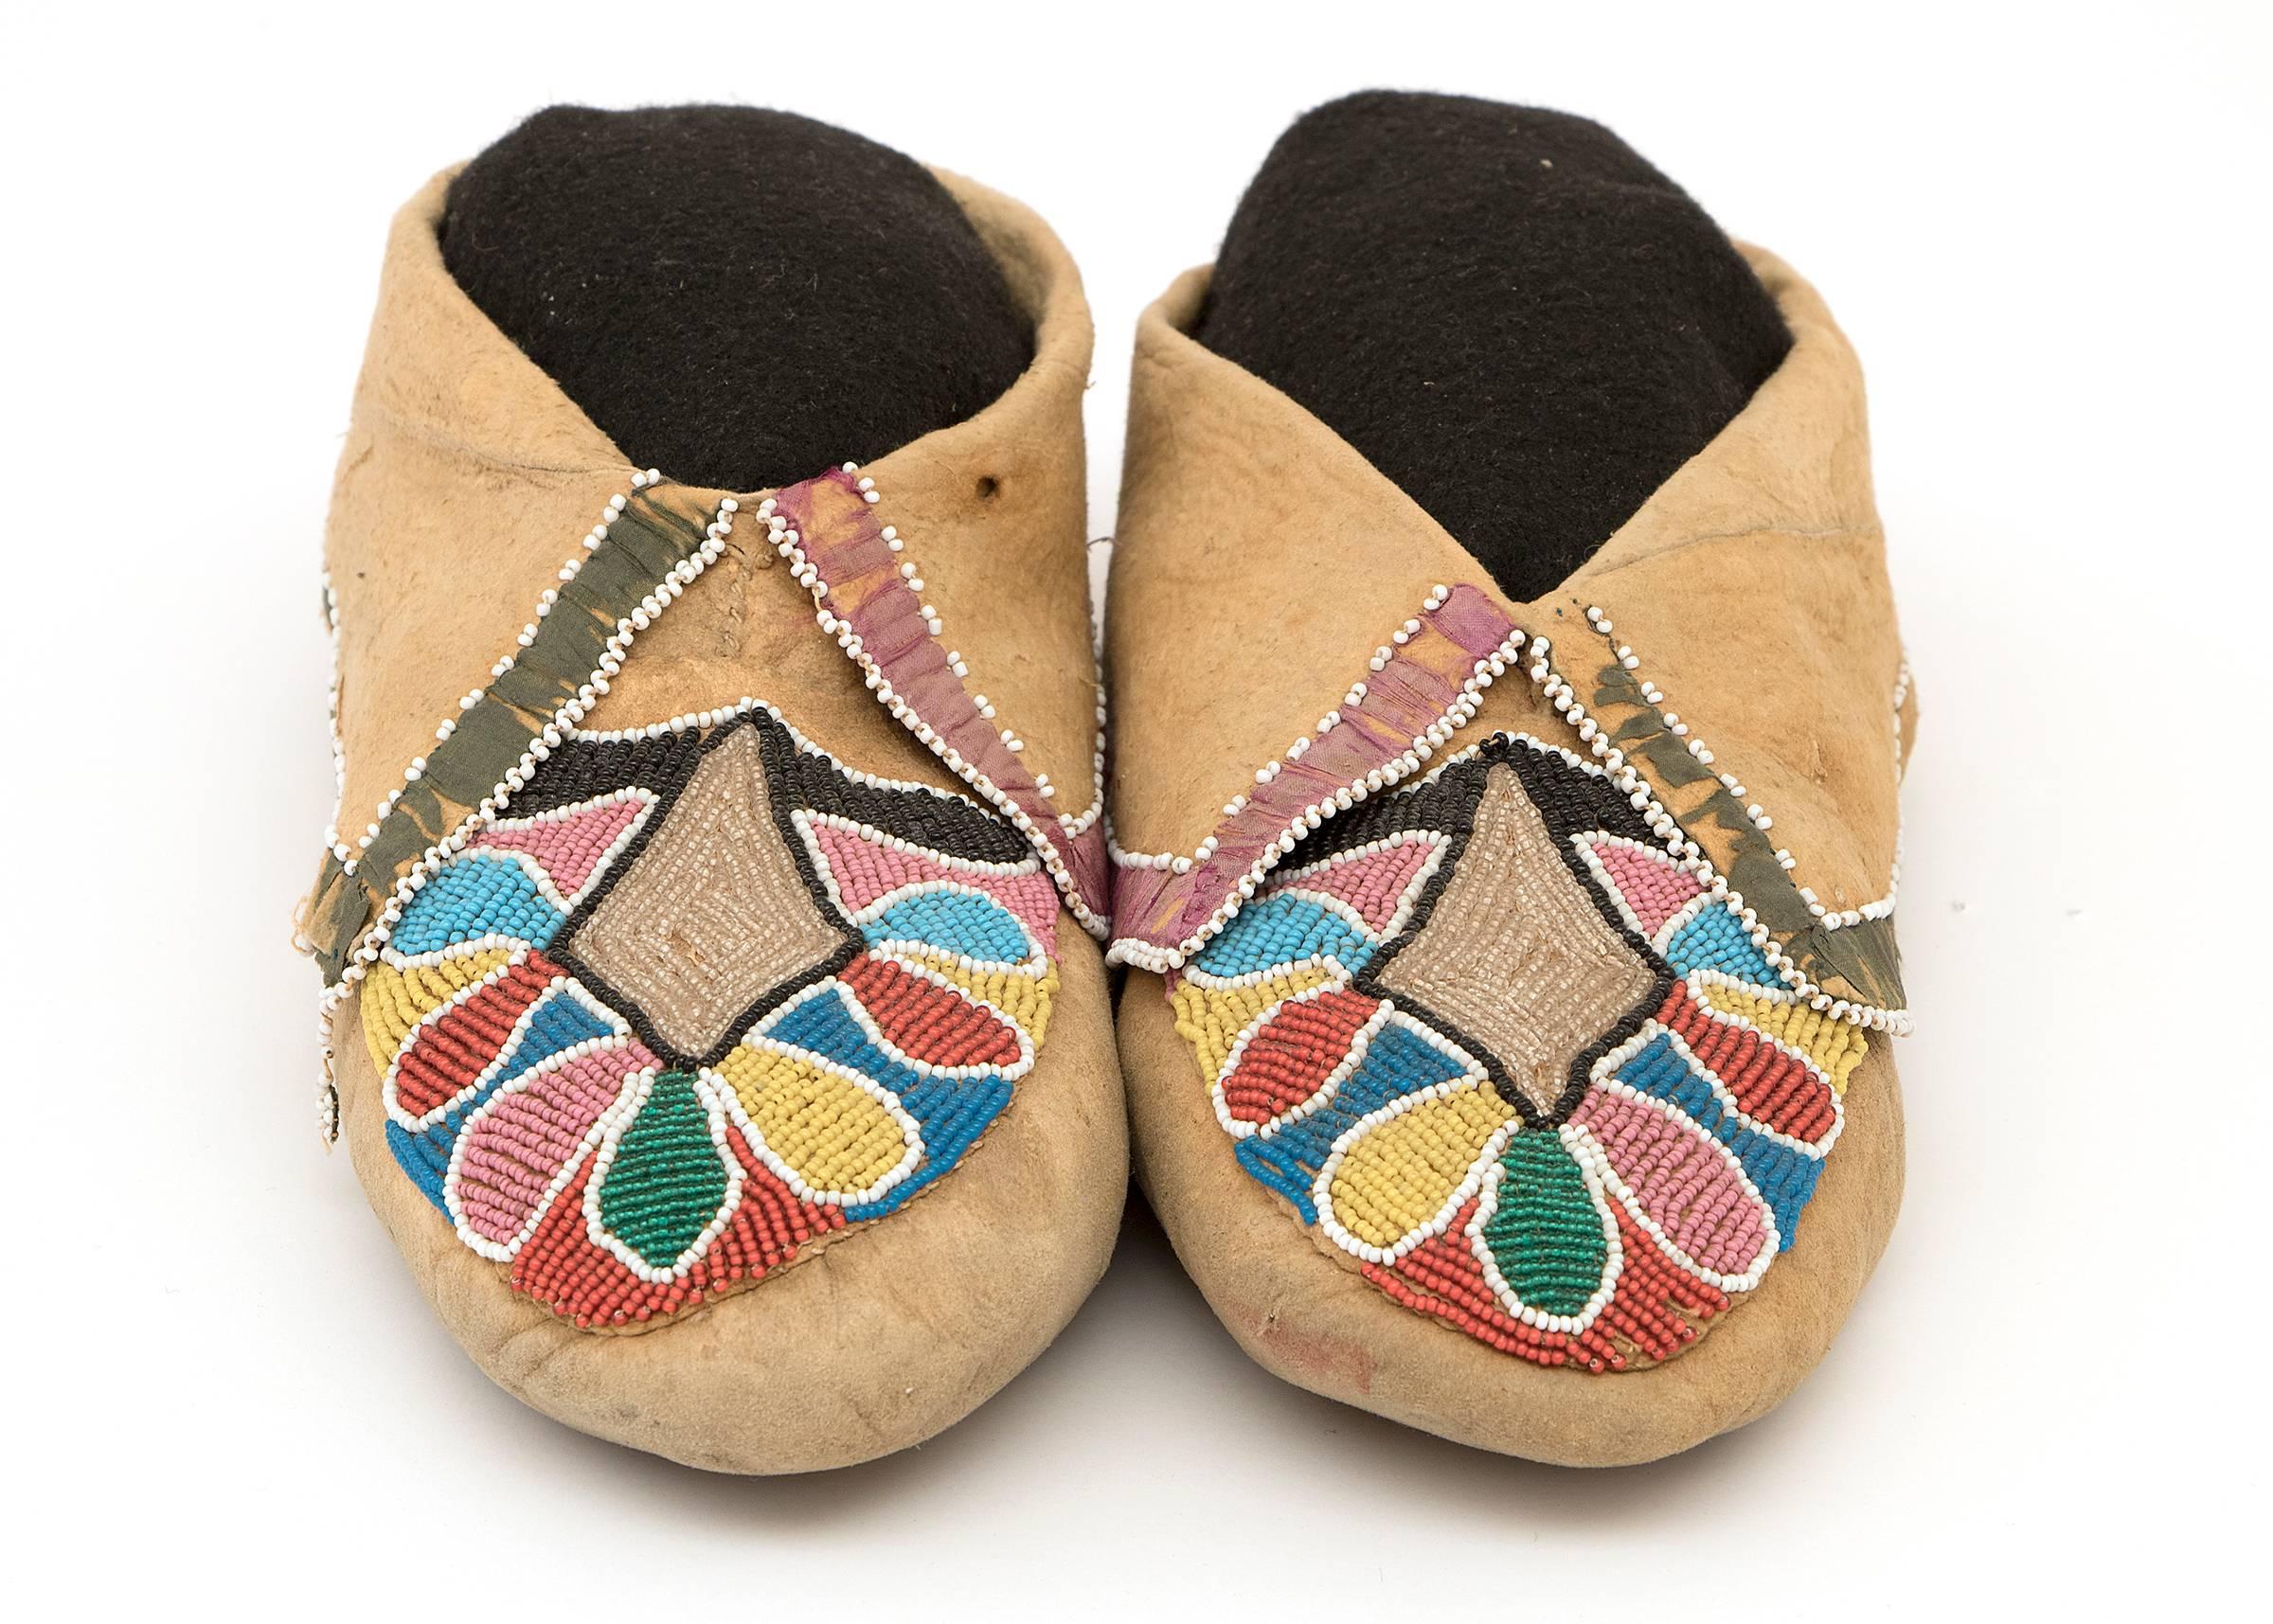 A rare early pair of Classic Period (Pre-Reservation era) soft-soled moccasins. Constructed of native tanned hide and exquisitely beaded with trade beads. The cuffs are adorned in ribbon with edge-beading.

Provenance:
Lessard Collection - SD